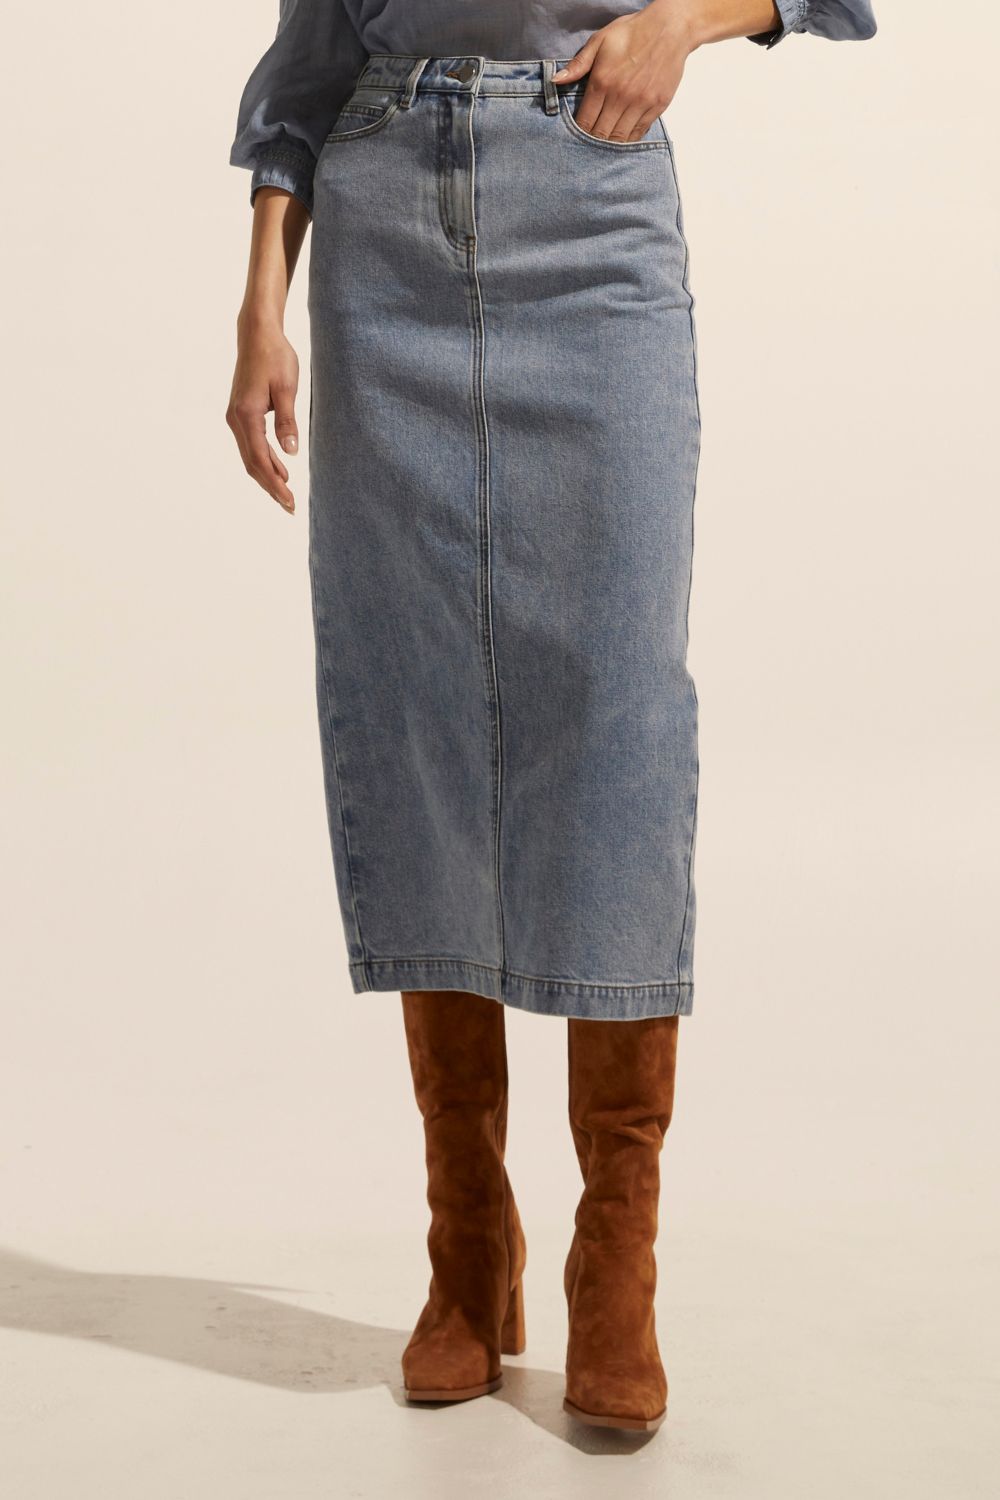 blue, midi skirt, denim midi skirt, denim skirt, side and back pockets, front image